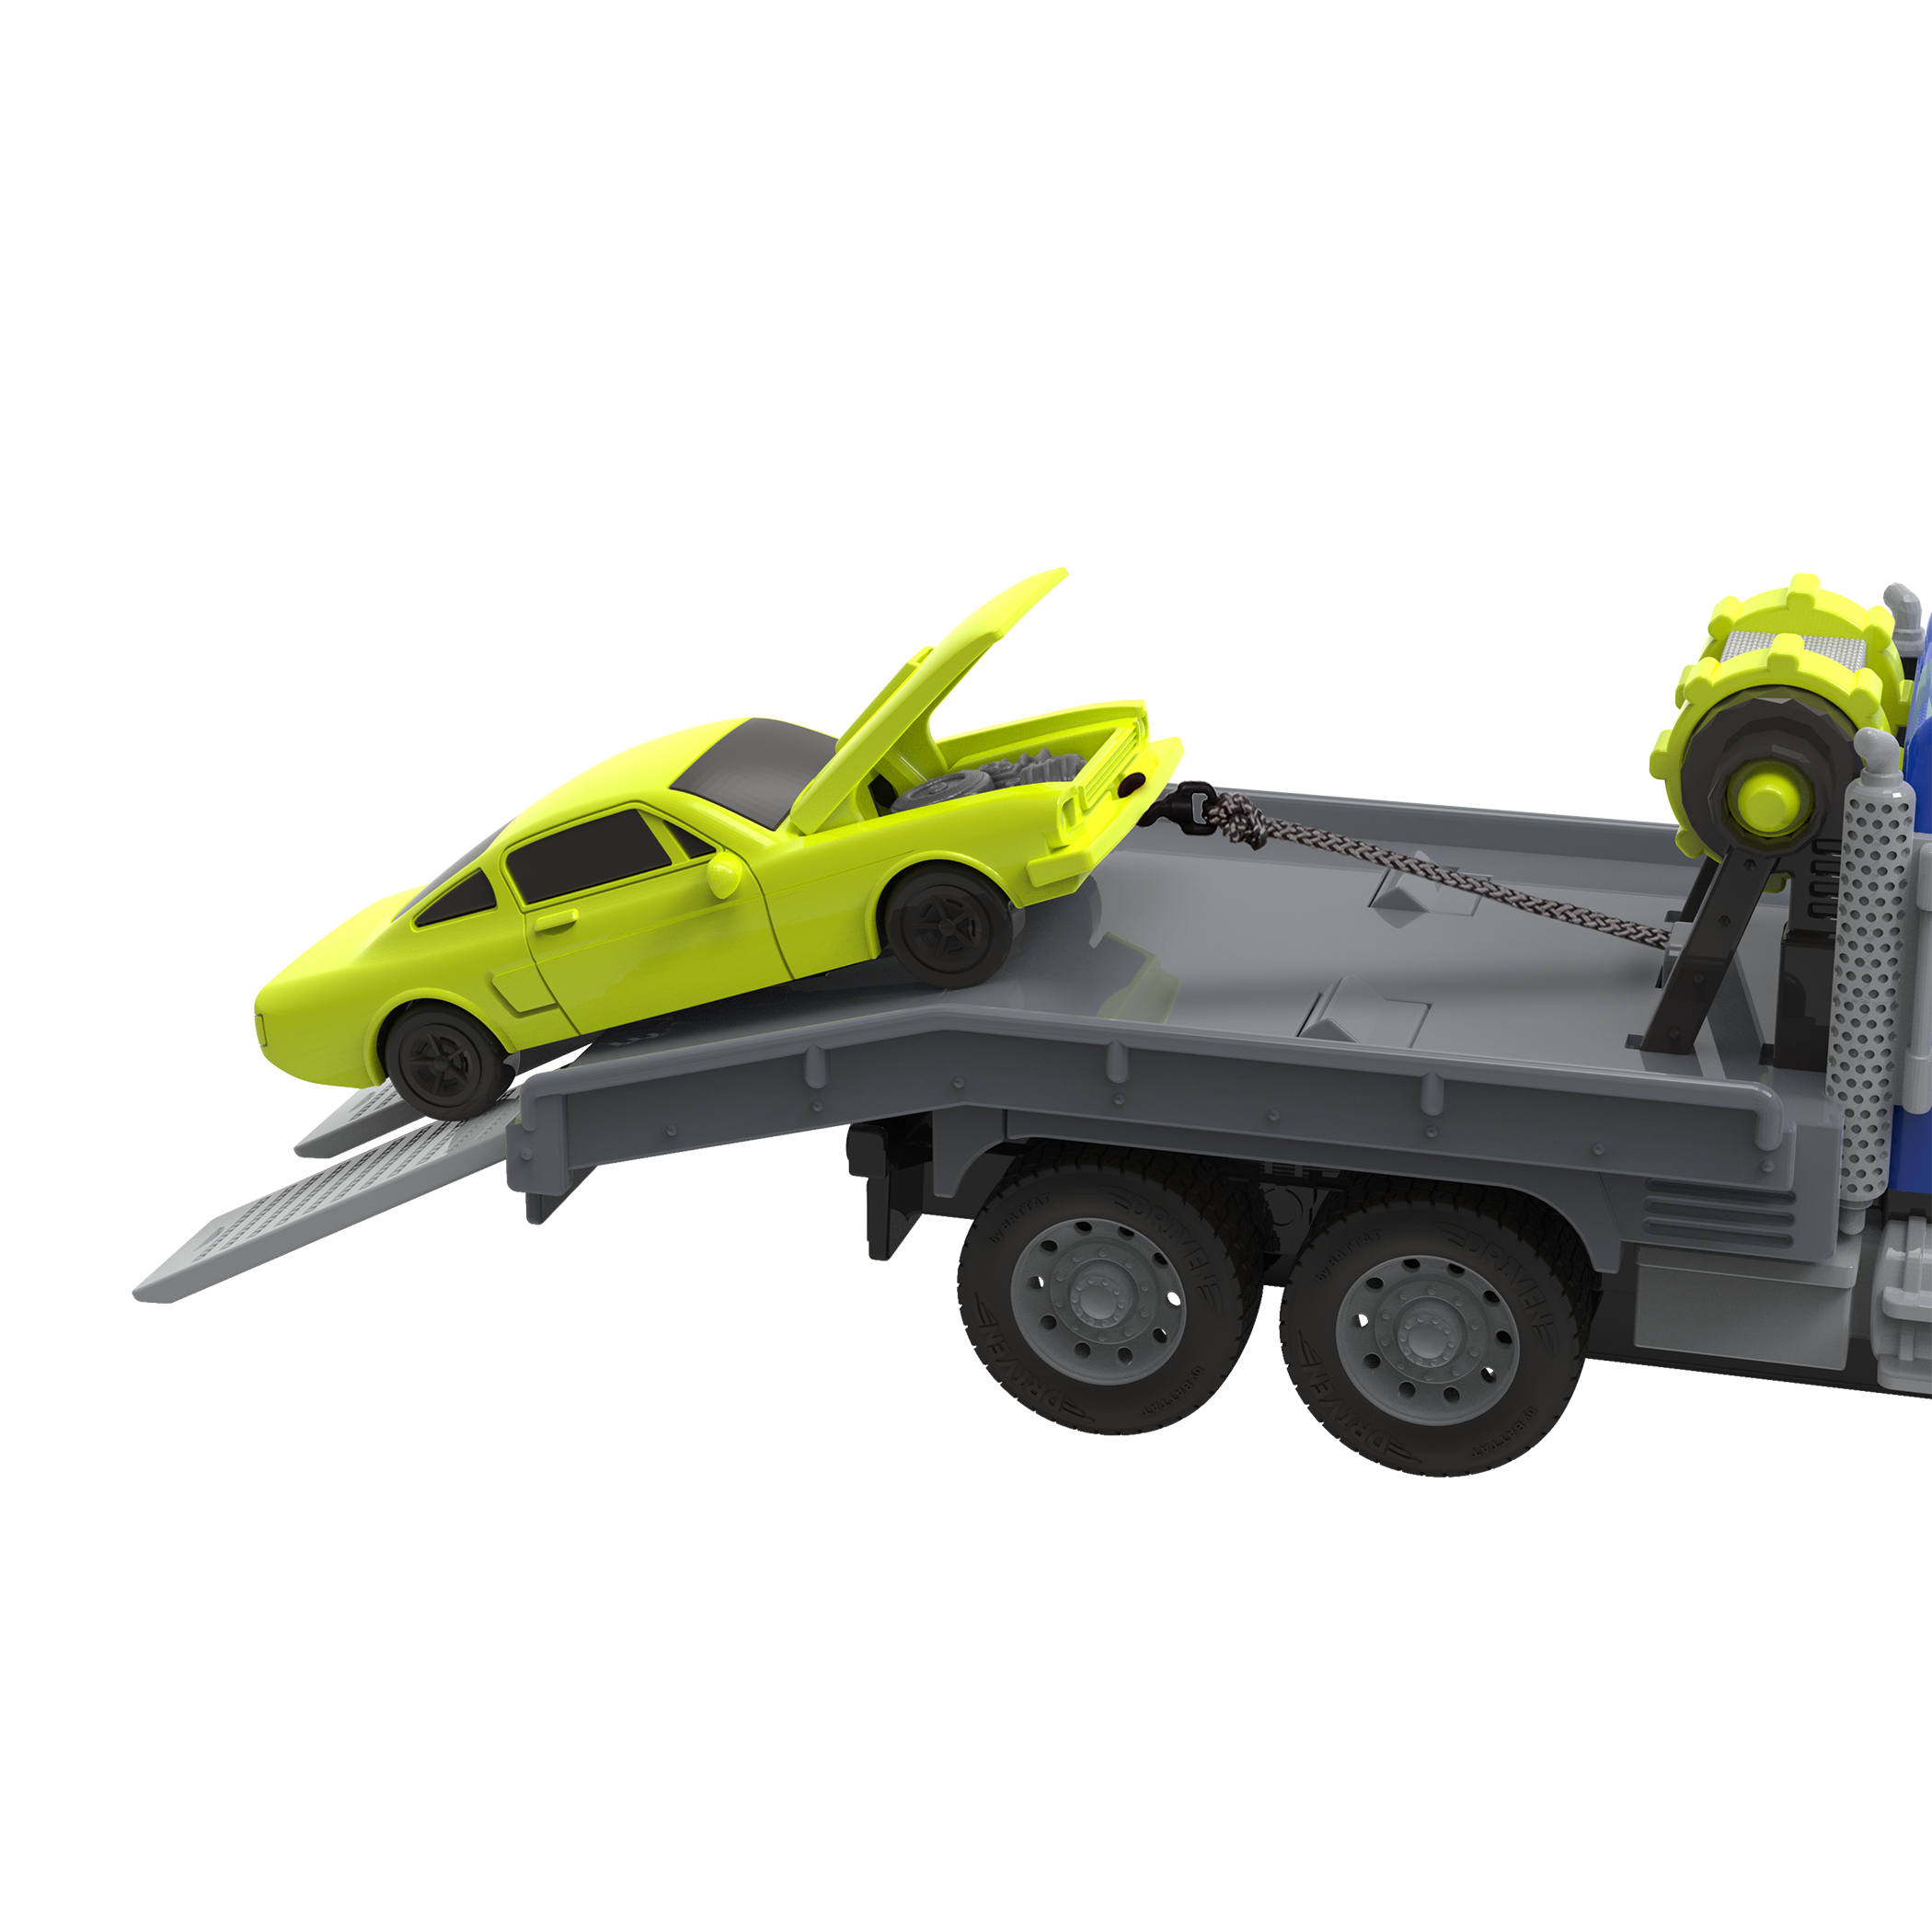 Micro R/C Tow Truck, Small Tow Truck Toy for Kids